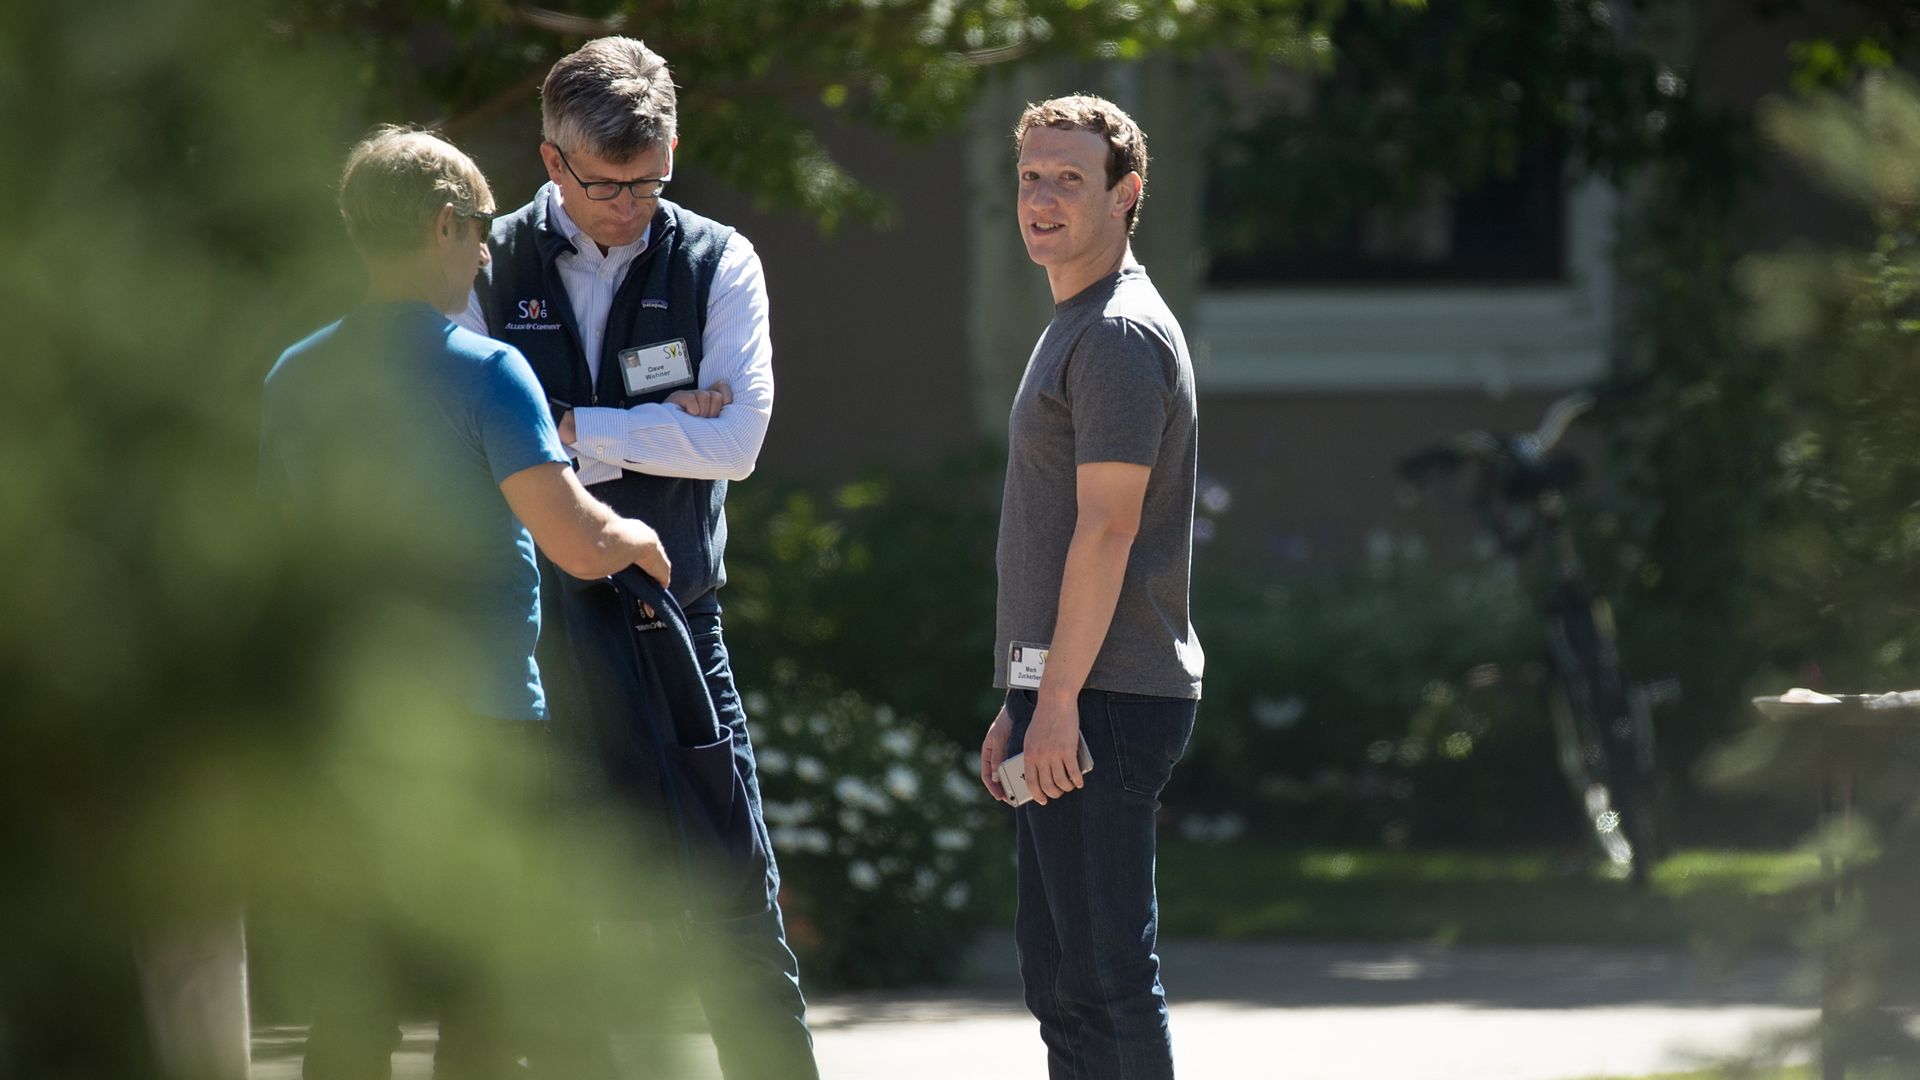 Mark Zuckberg stands with two other men